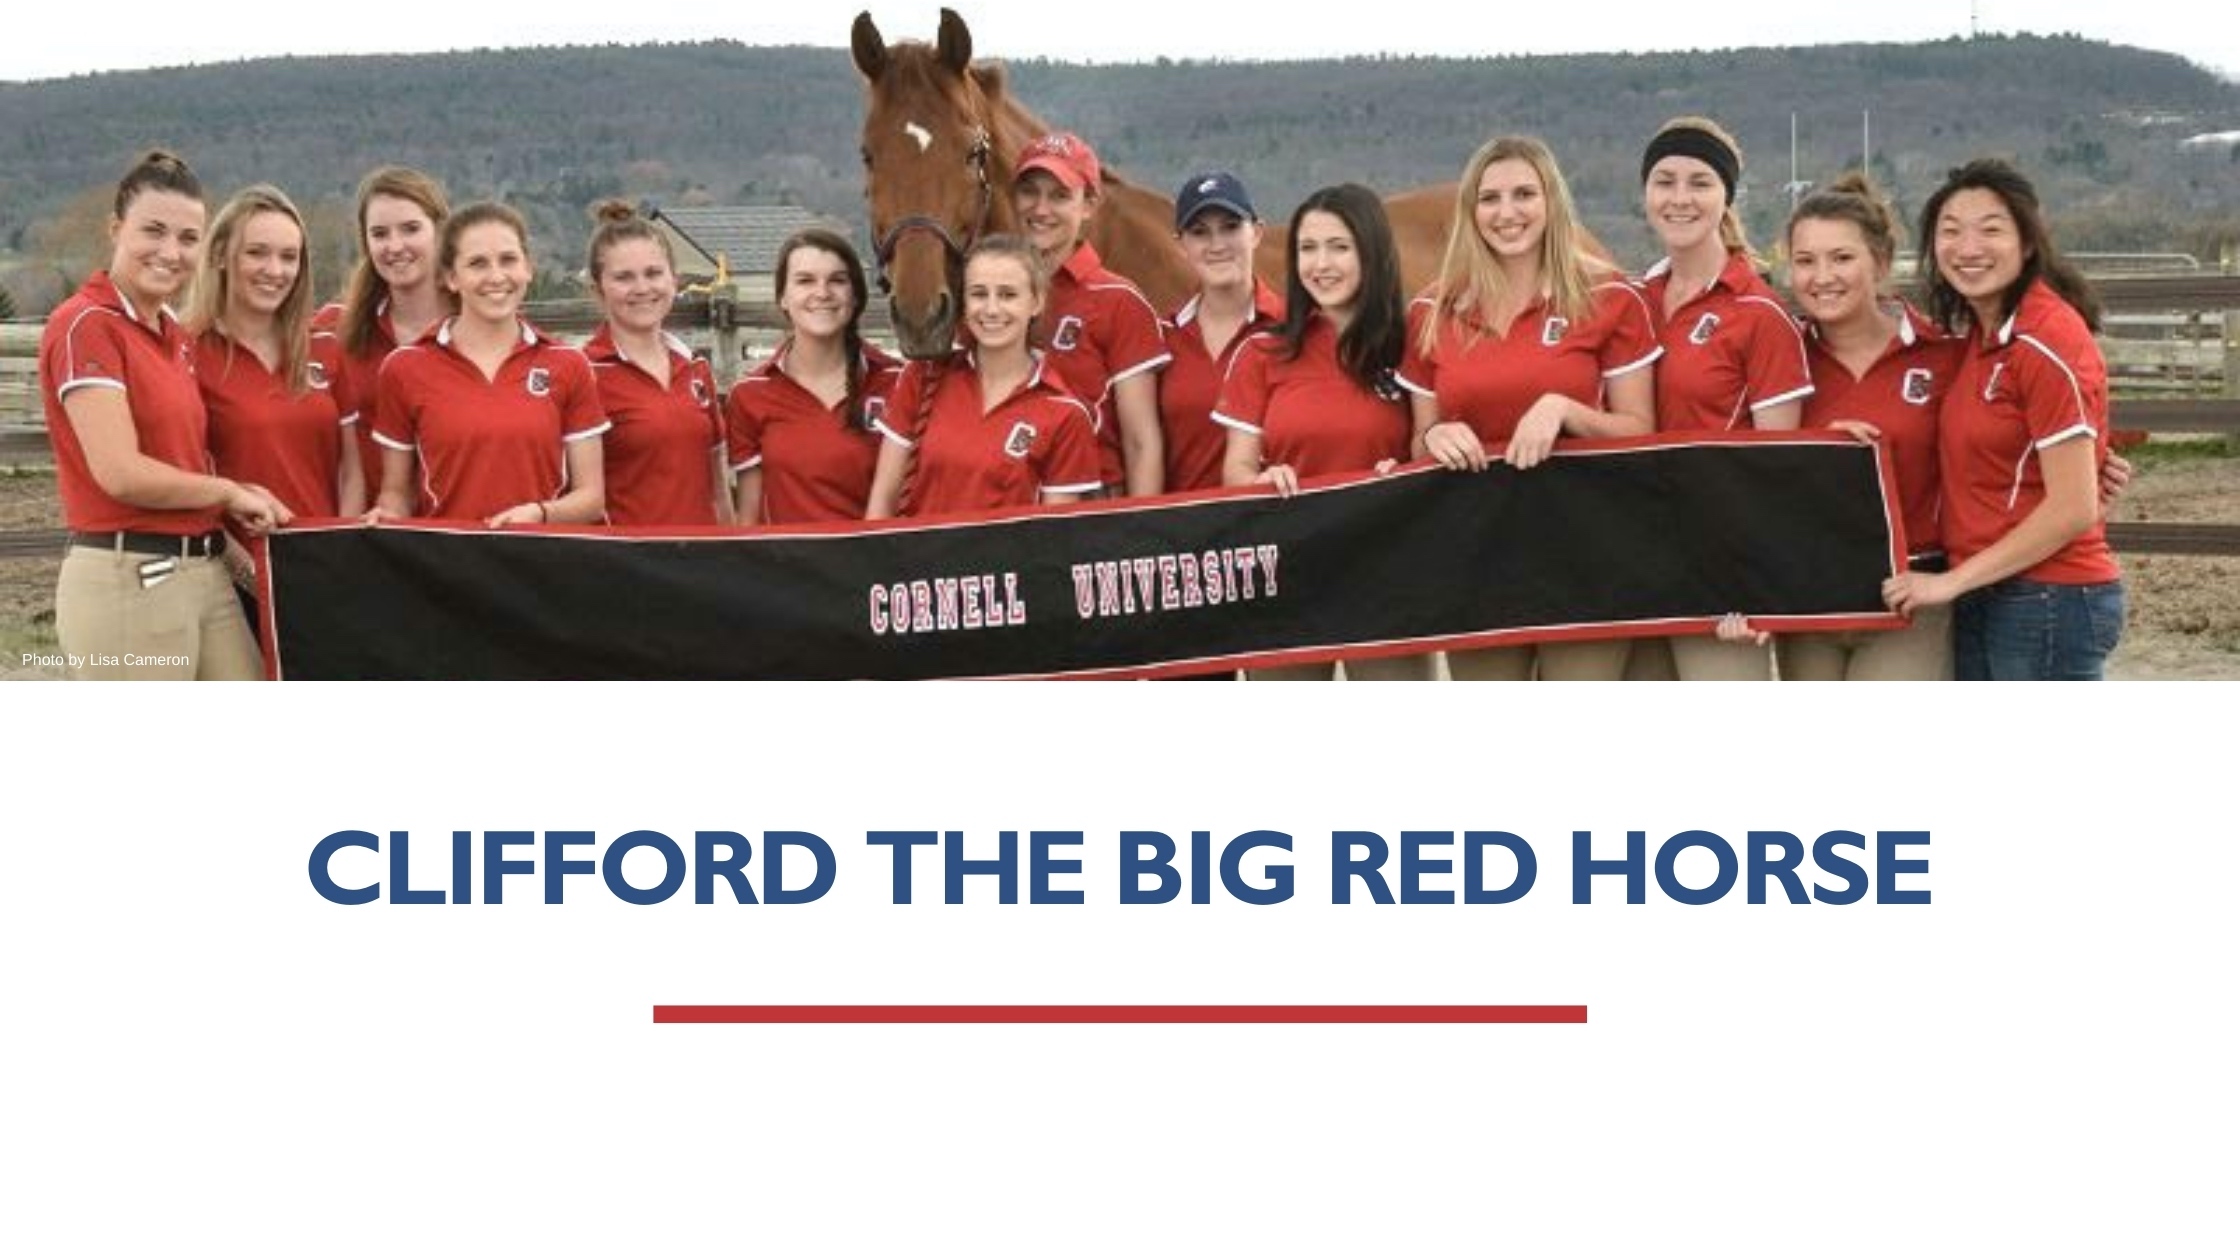 ihsa-hall-of-fame-clifford-the-big-red-horse